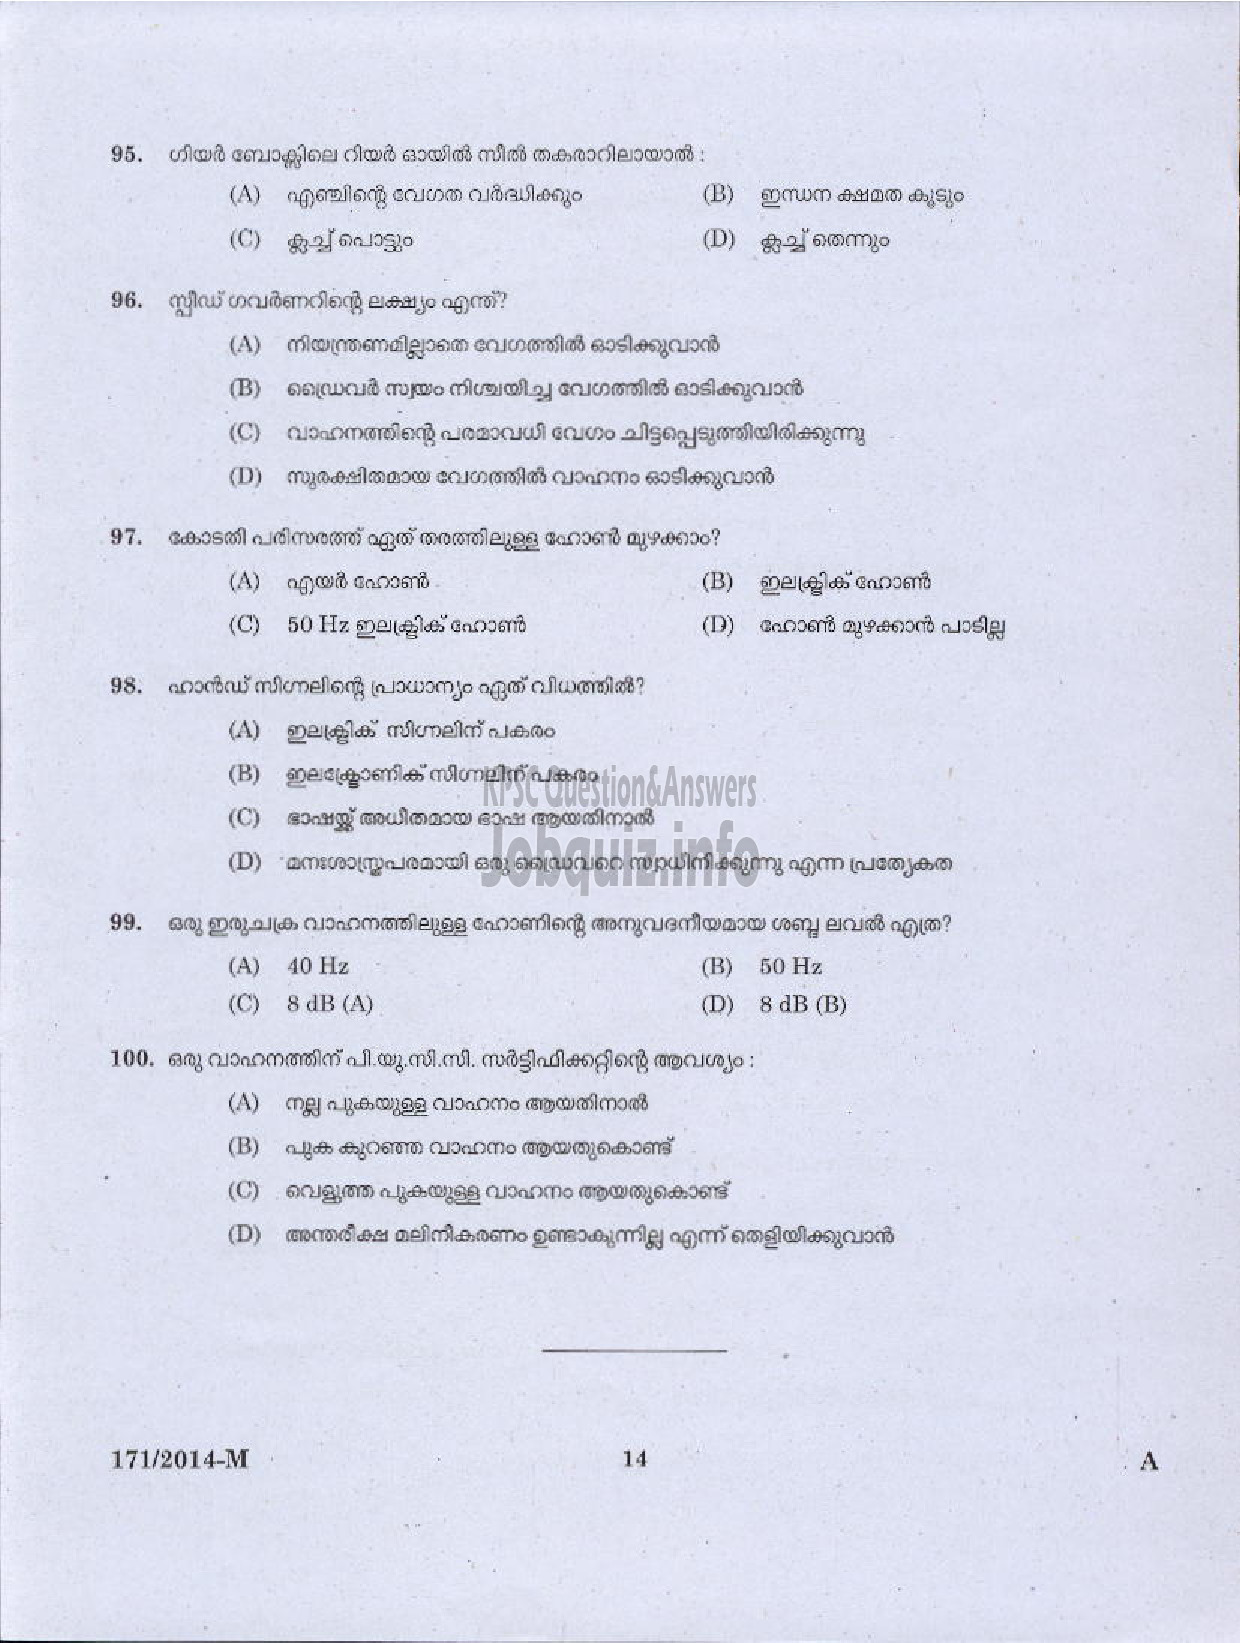 Kerala PSC Question Paper - DRIVER GR II KERALA ELECTRICAL AND ALLIED ENGINEERING COMPANY LTD ( Malayalam ) -12